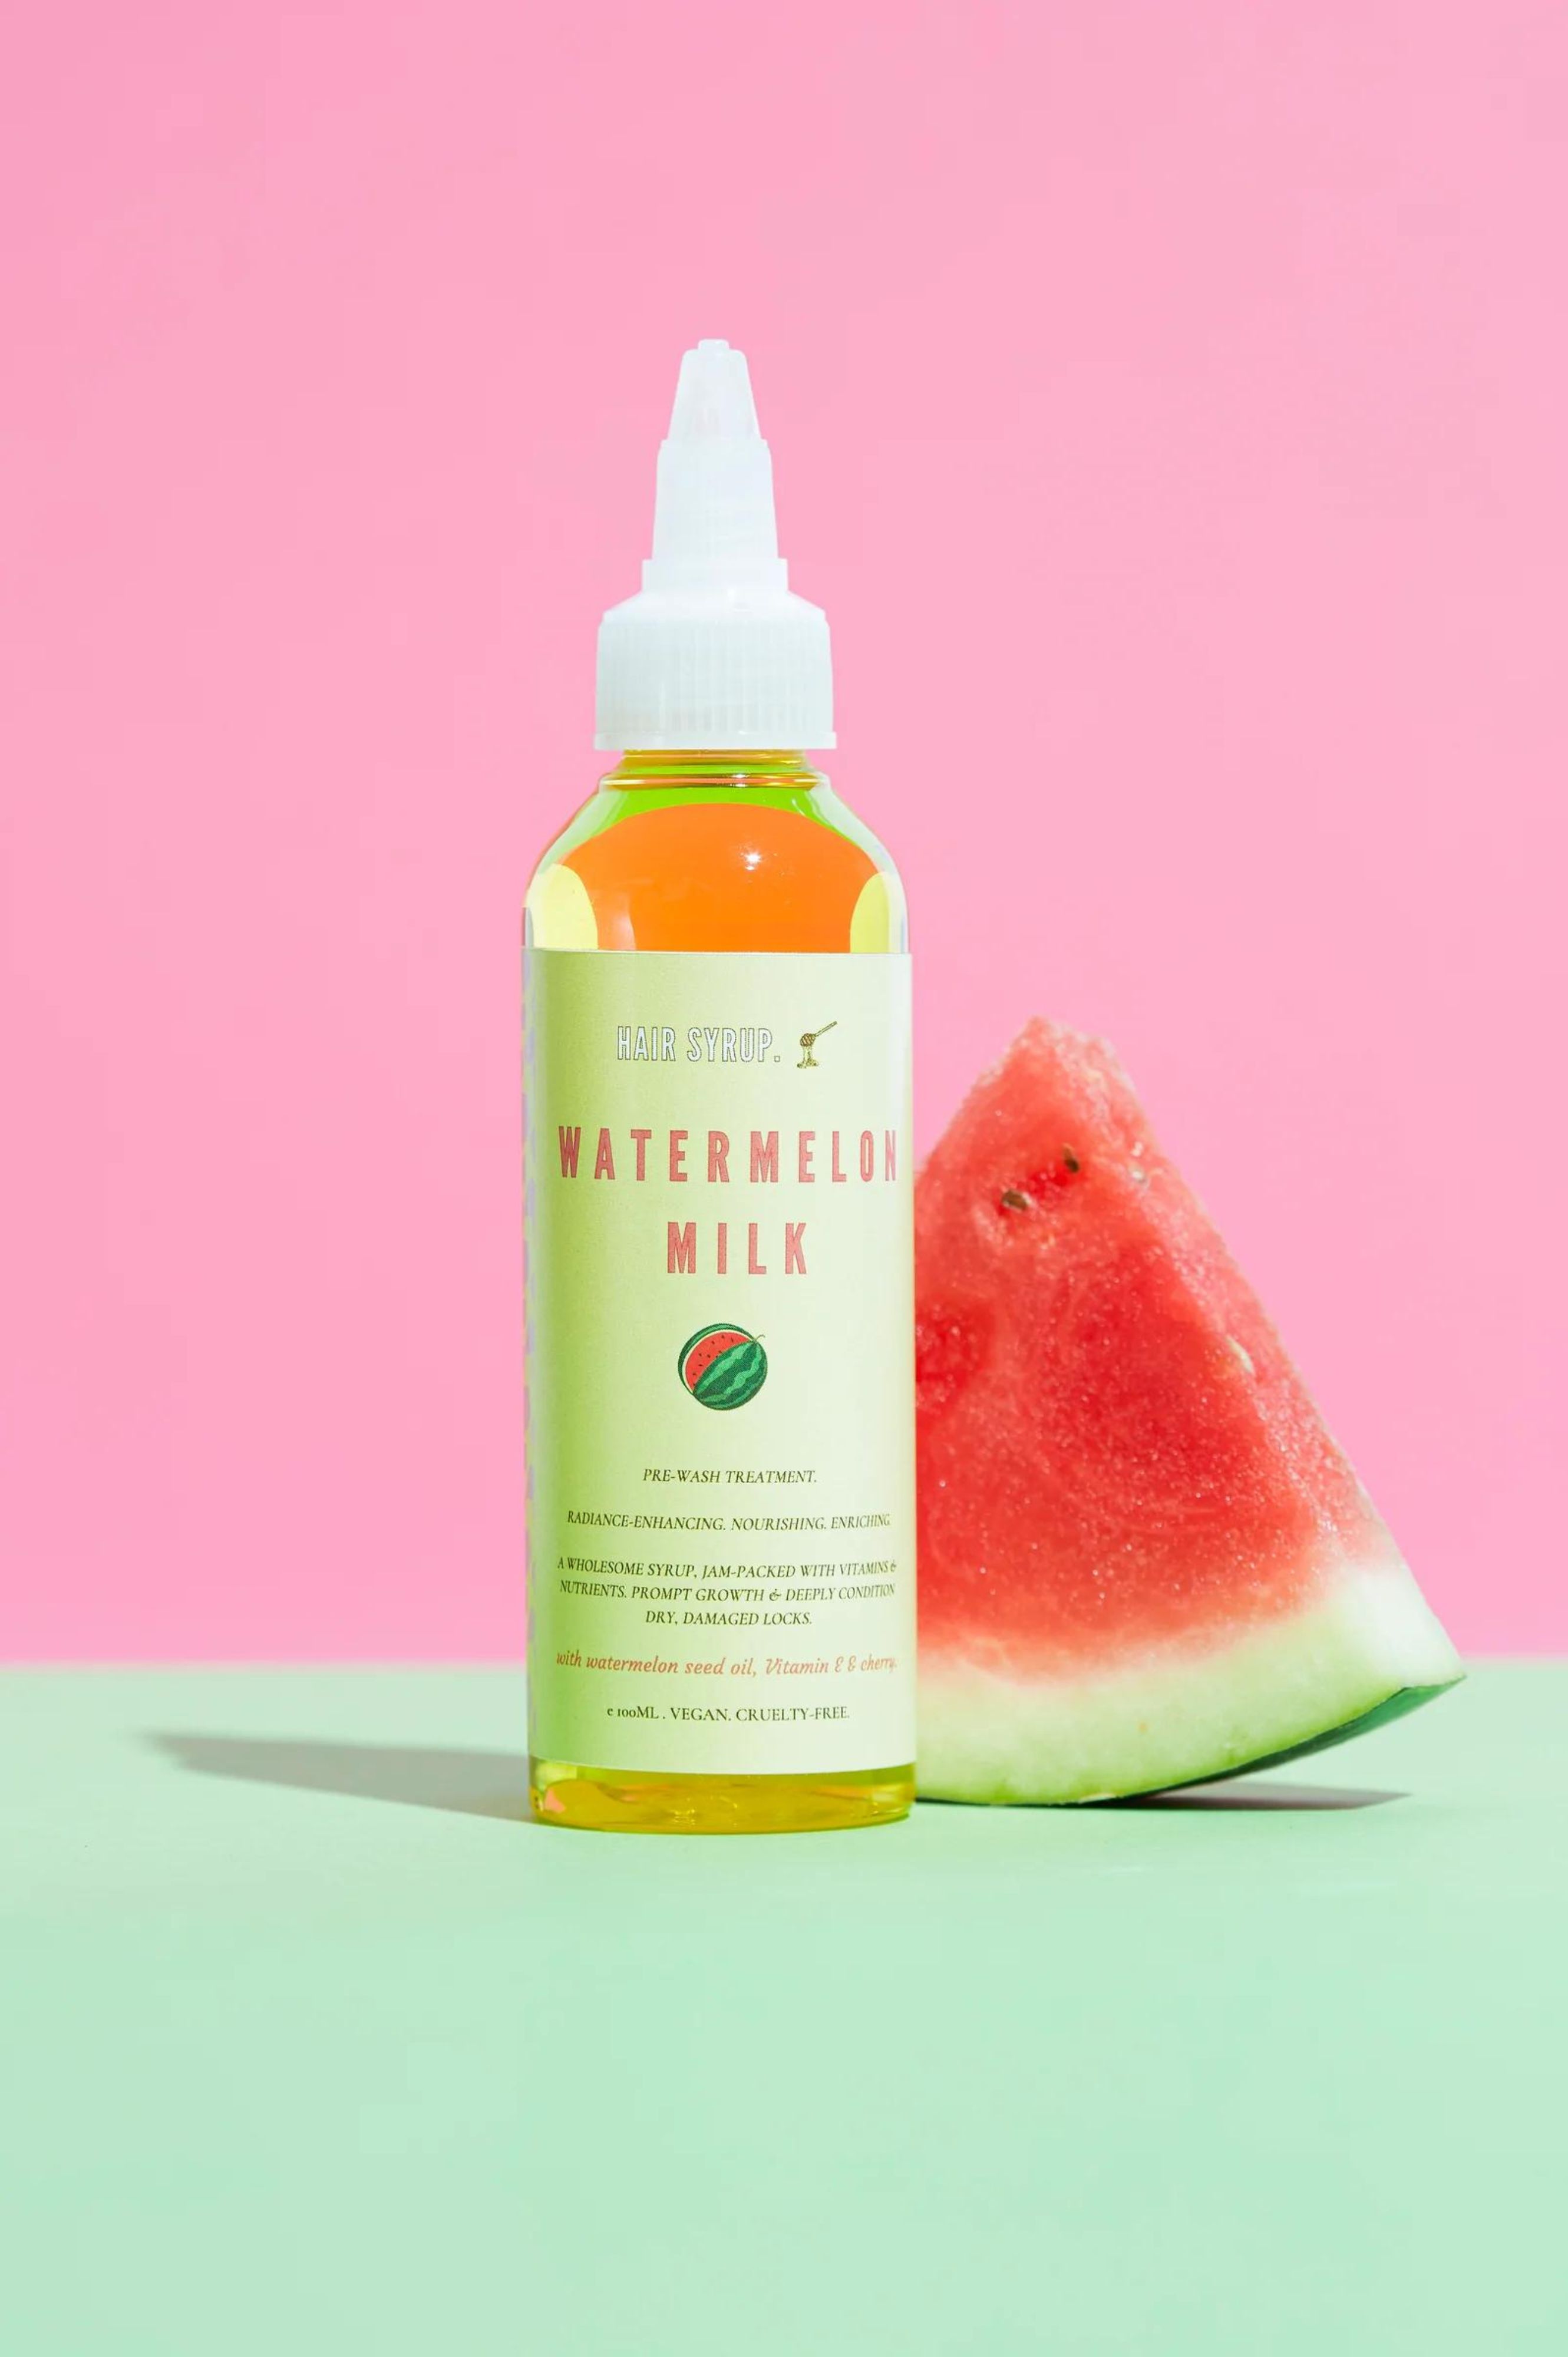 “Watermelon milk” hair syrup for bleached and shiny less hair